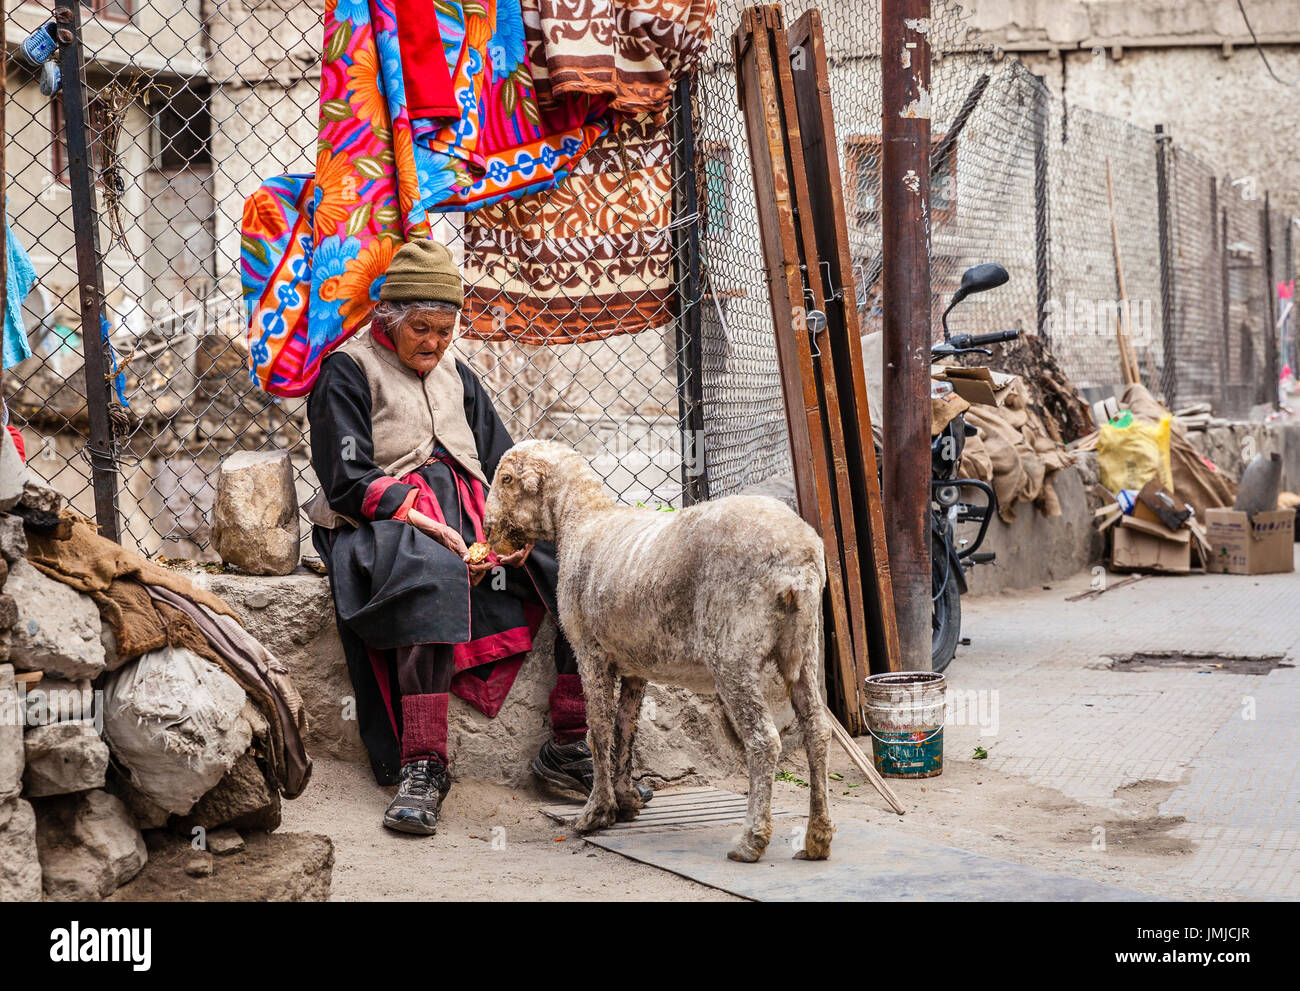 Leh, Ladakh, India, July 12, 2016: elderly woman in feeding a sheep on the street in the city of Leh, Ladakh district of Kashmir, India Stock Photo